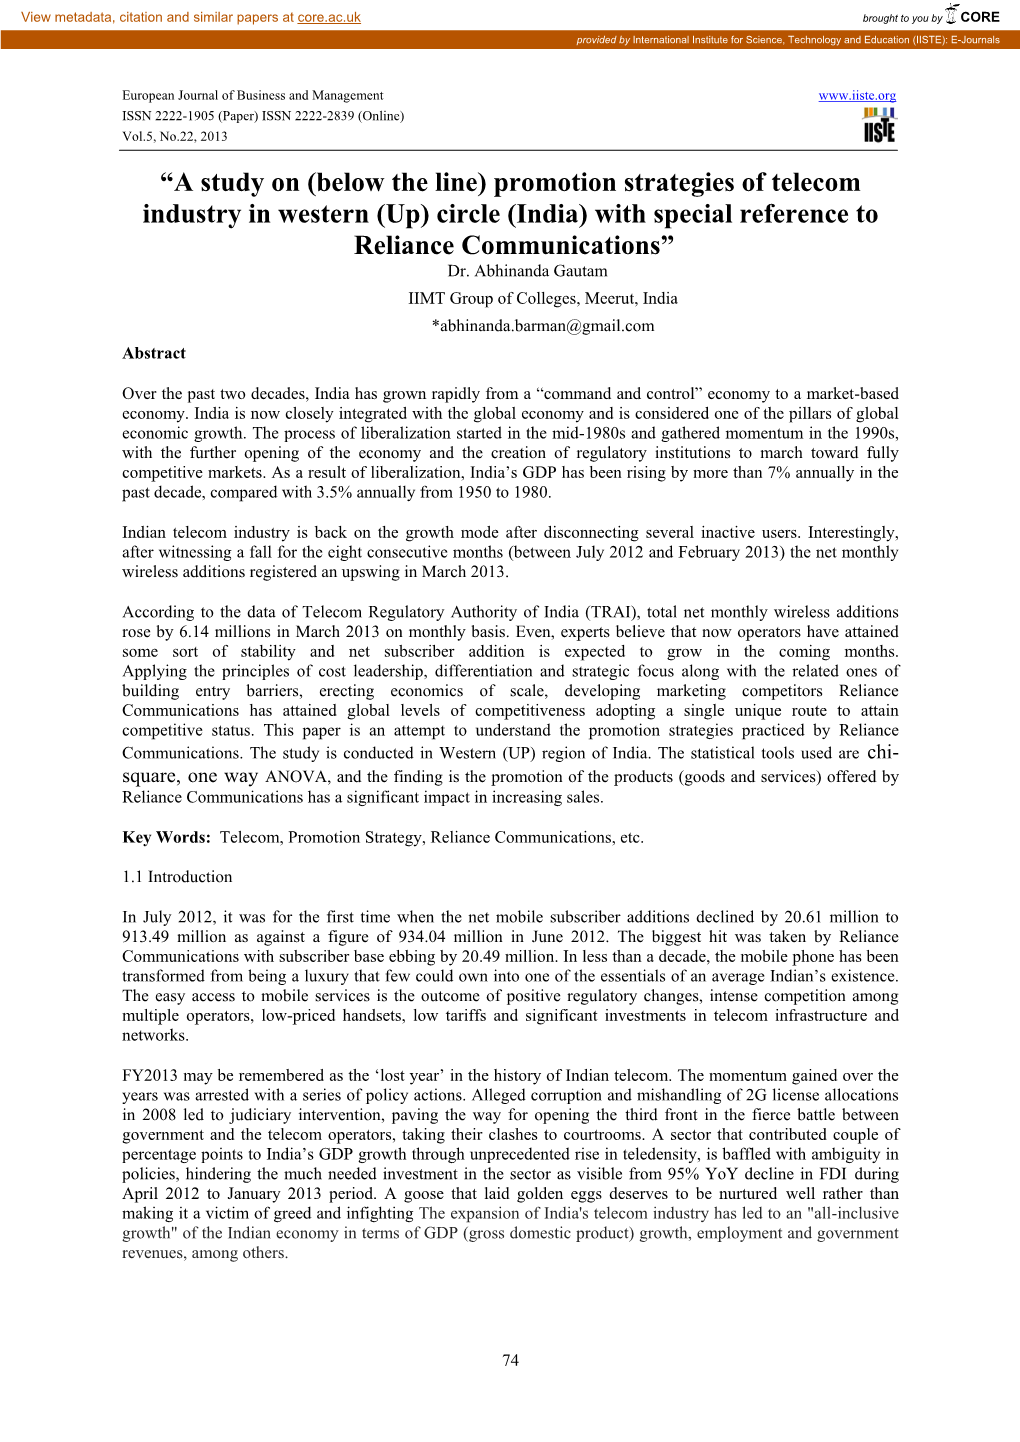 “A Study on (Below the Line) Promotion Strategies of Telecom Industry in Western (Up) Circle (India) with Special Reference to Reliance Communications” Dr